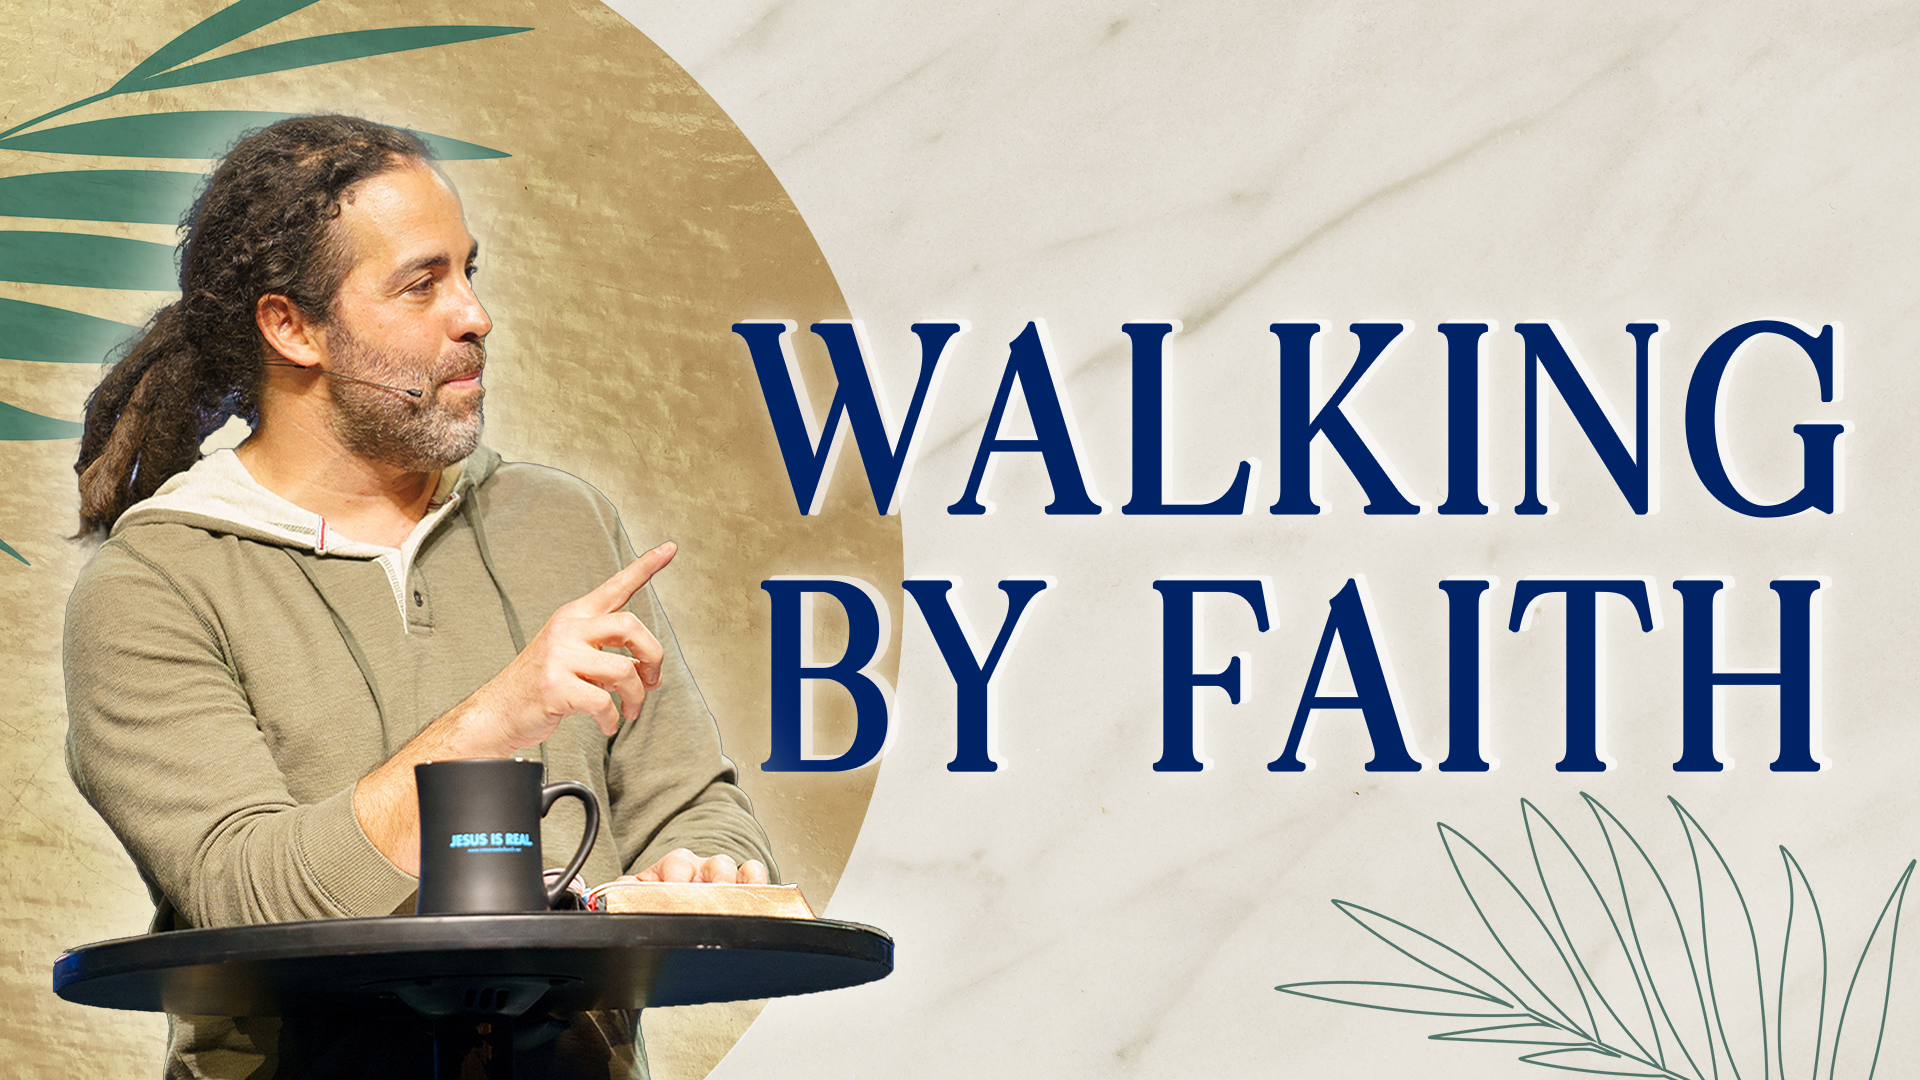 Walking By Faith image